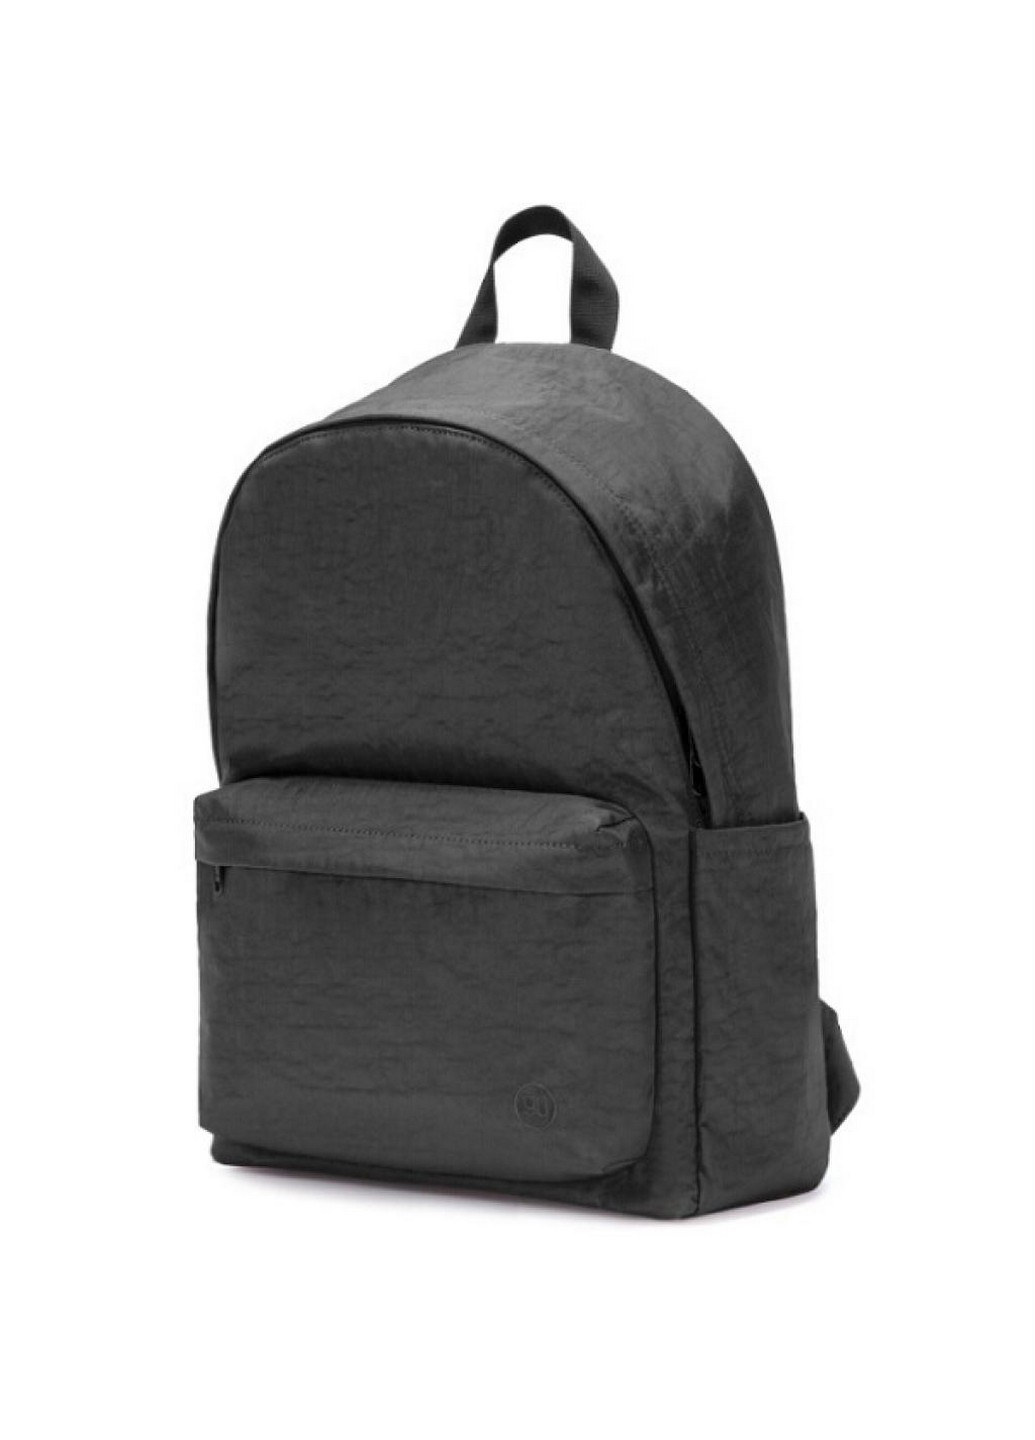 Рюкзак (6972125147943) Xiaomi runmi 90 points youth college backpack black (196922590)